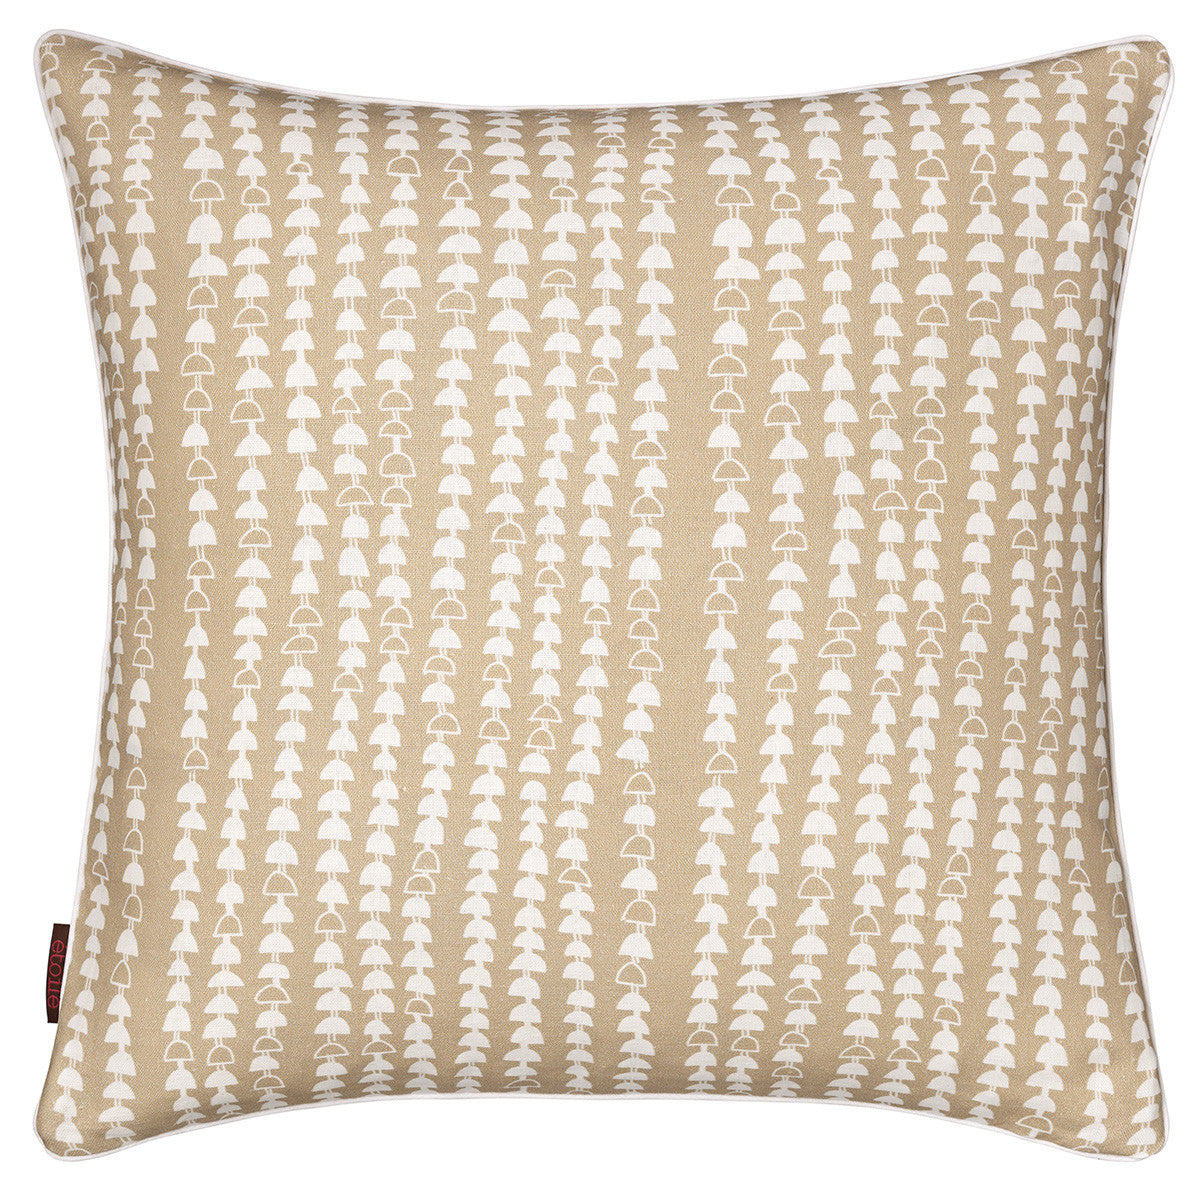 Hopi Graphic Patterned Linen Union Decorative Throw Pillow (Cream) Earth 45x45cm 18x18" Ships from Canada worldwide including the USA